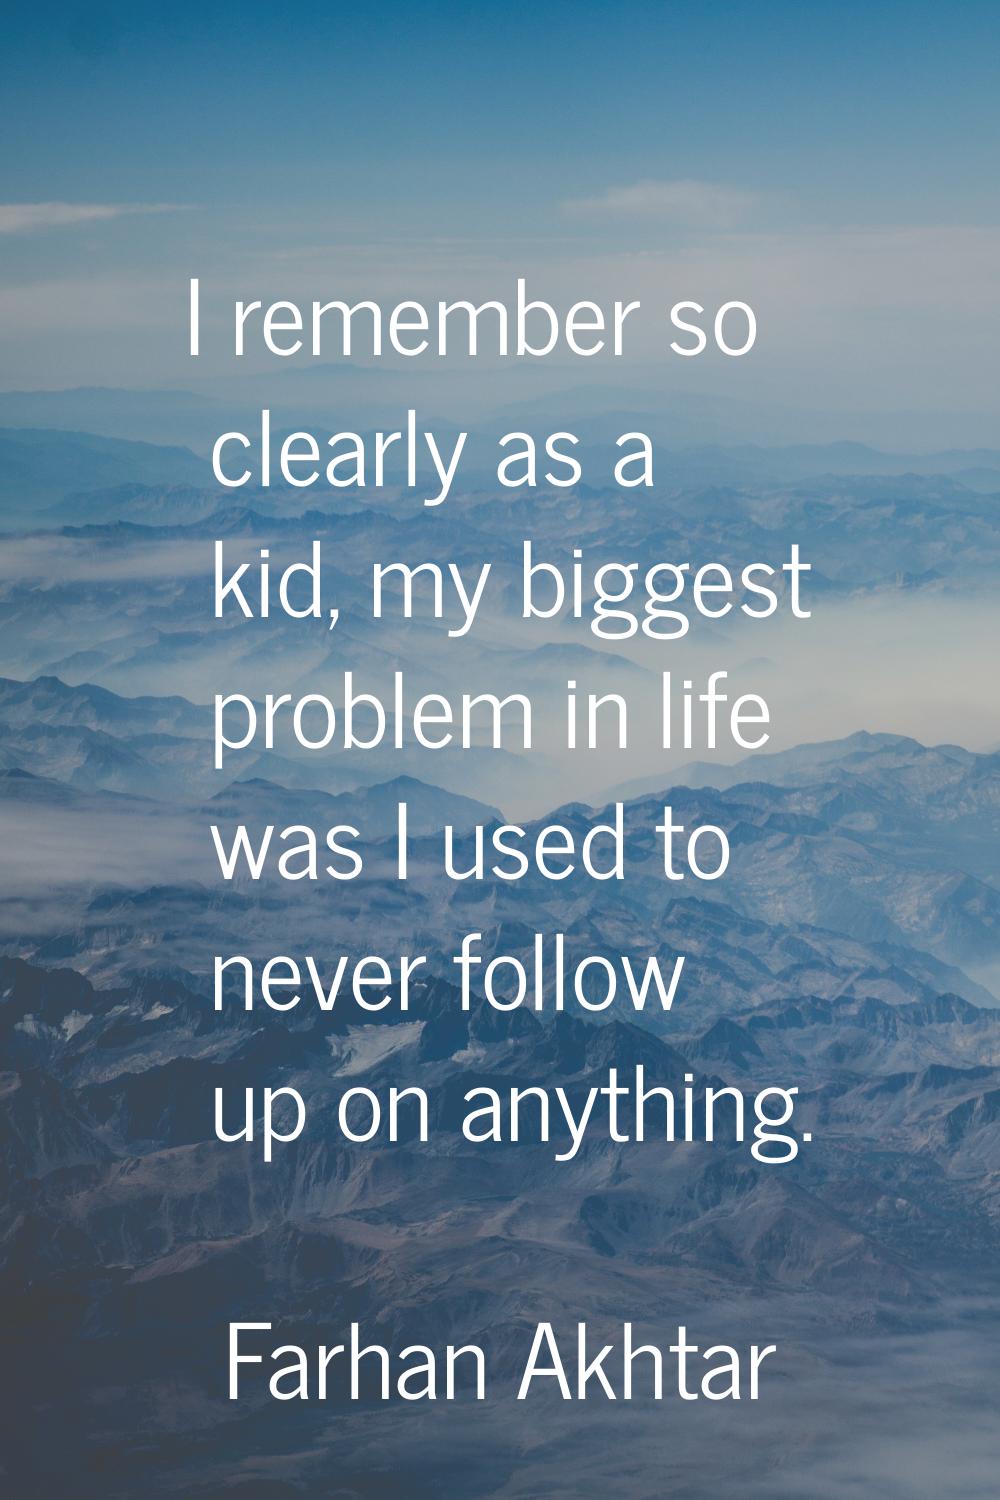 I remember so clearly as a kid, my biggest problem in life was I used to never follow up on anythin